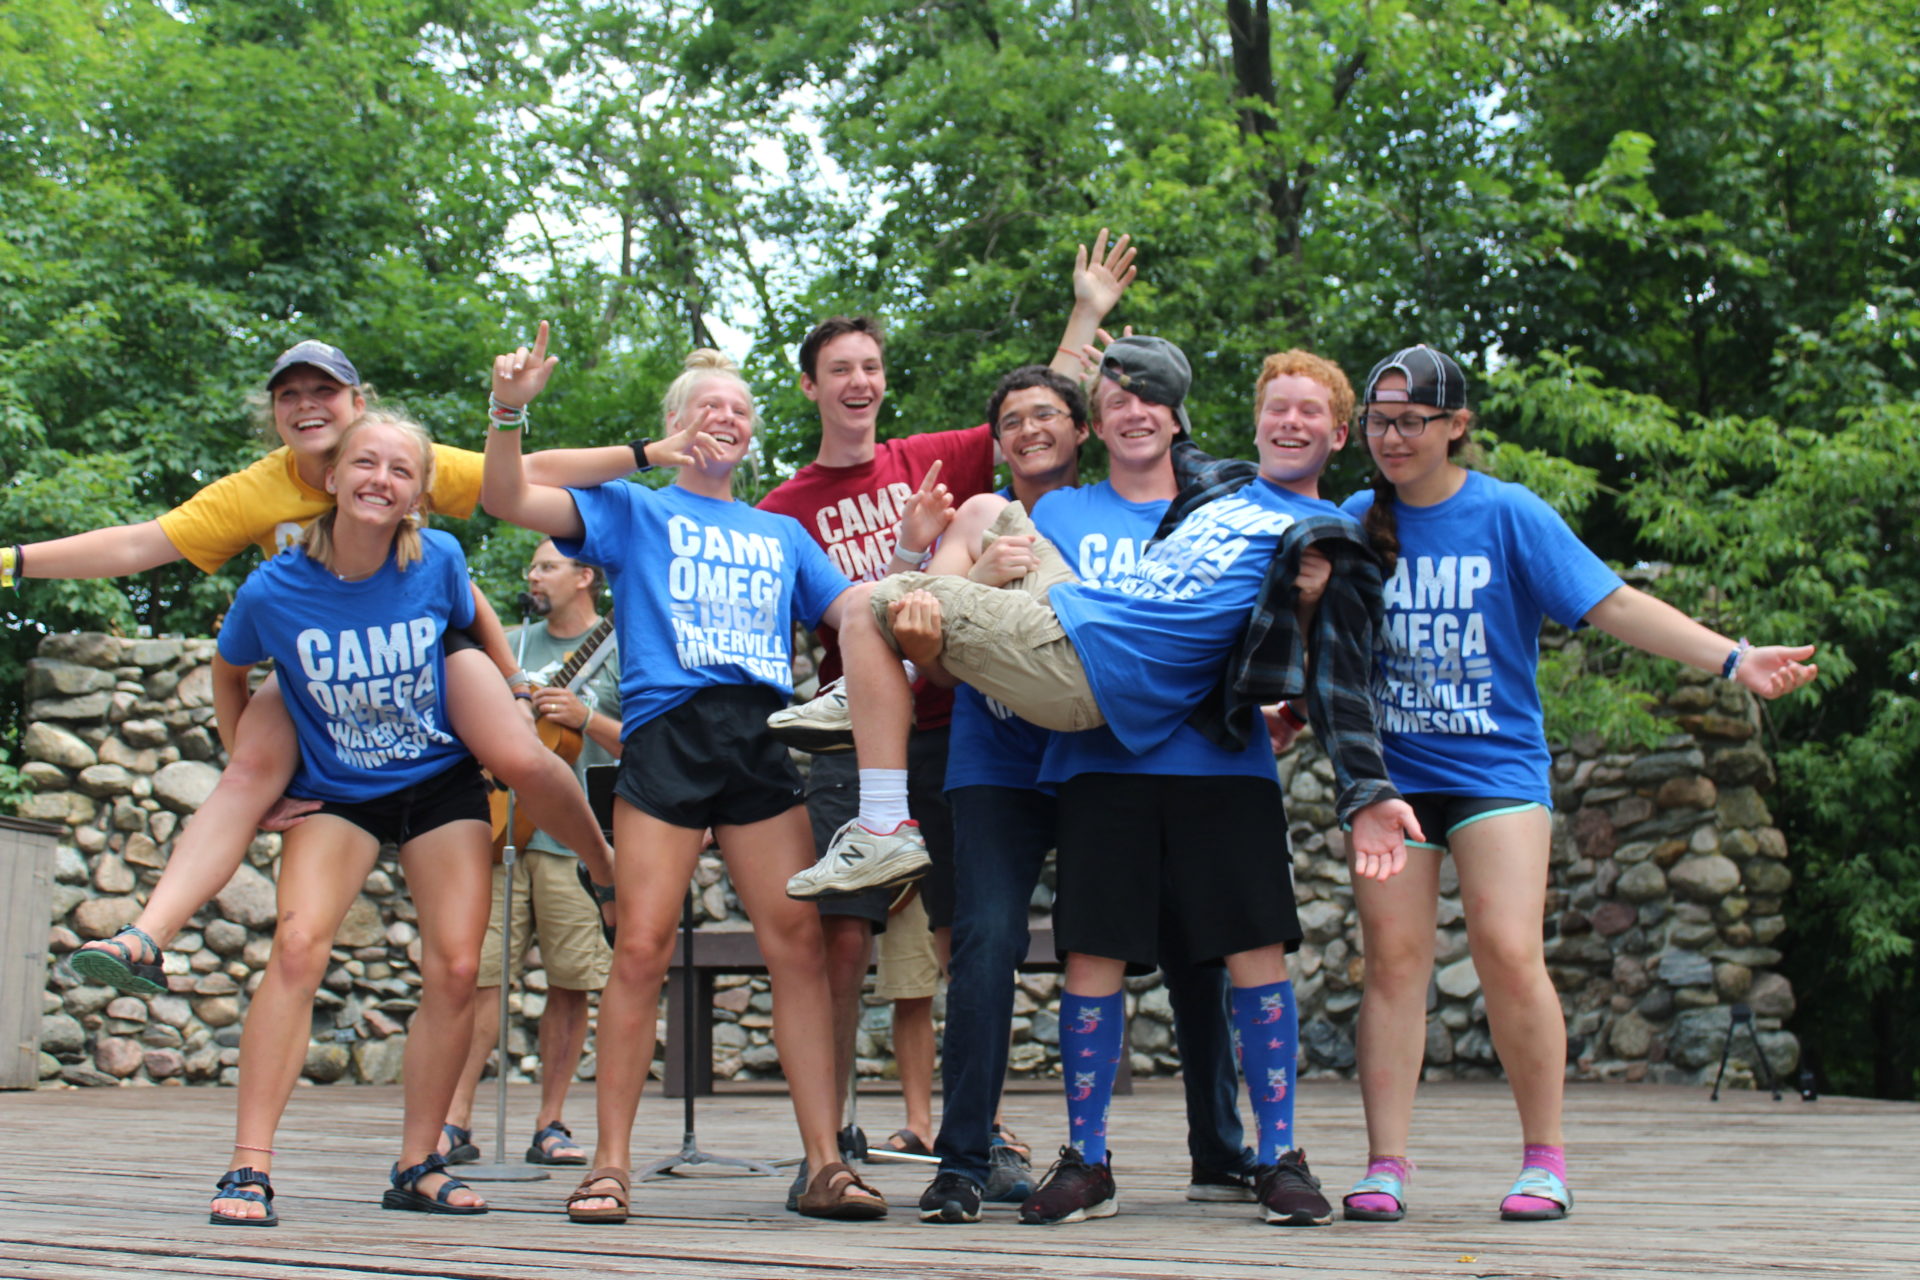 Youth Servant Leaders | Camp Omega - Waterville MN